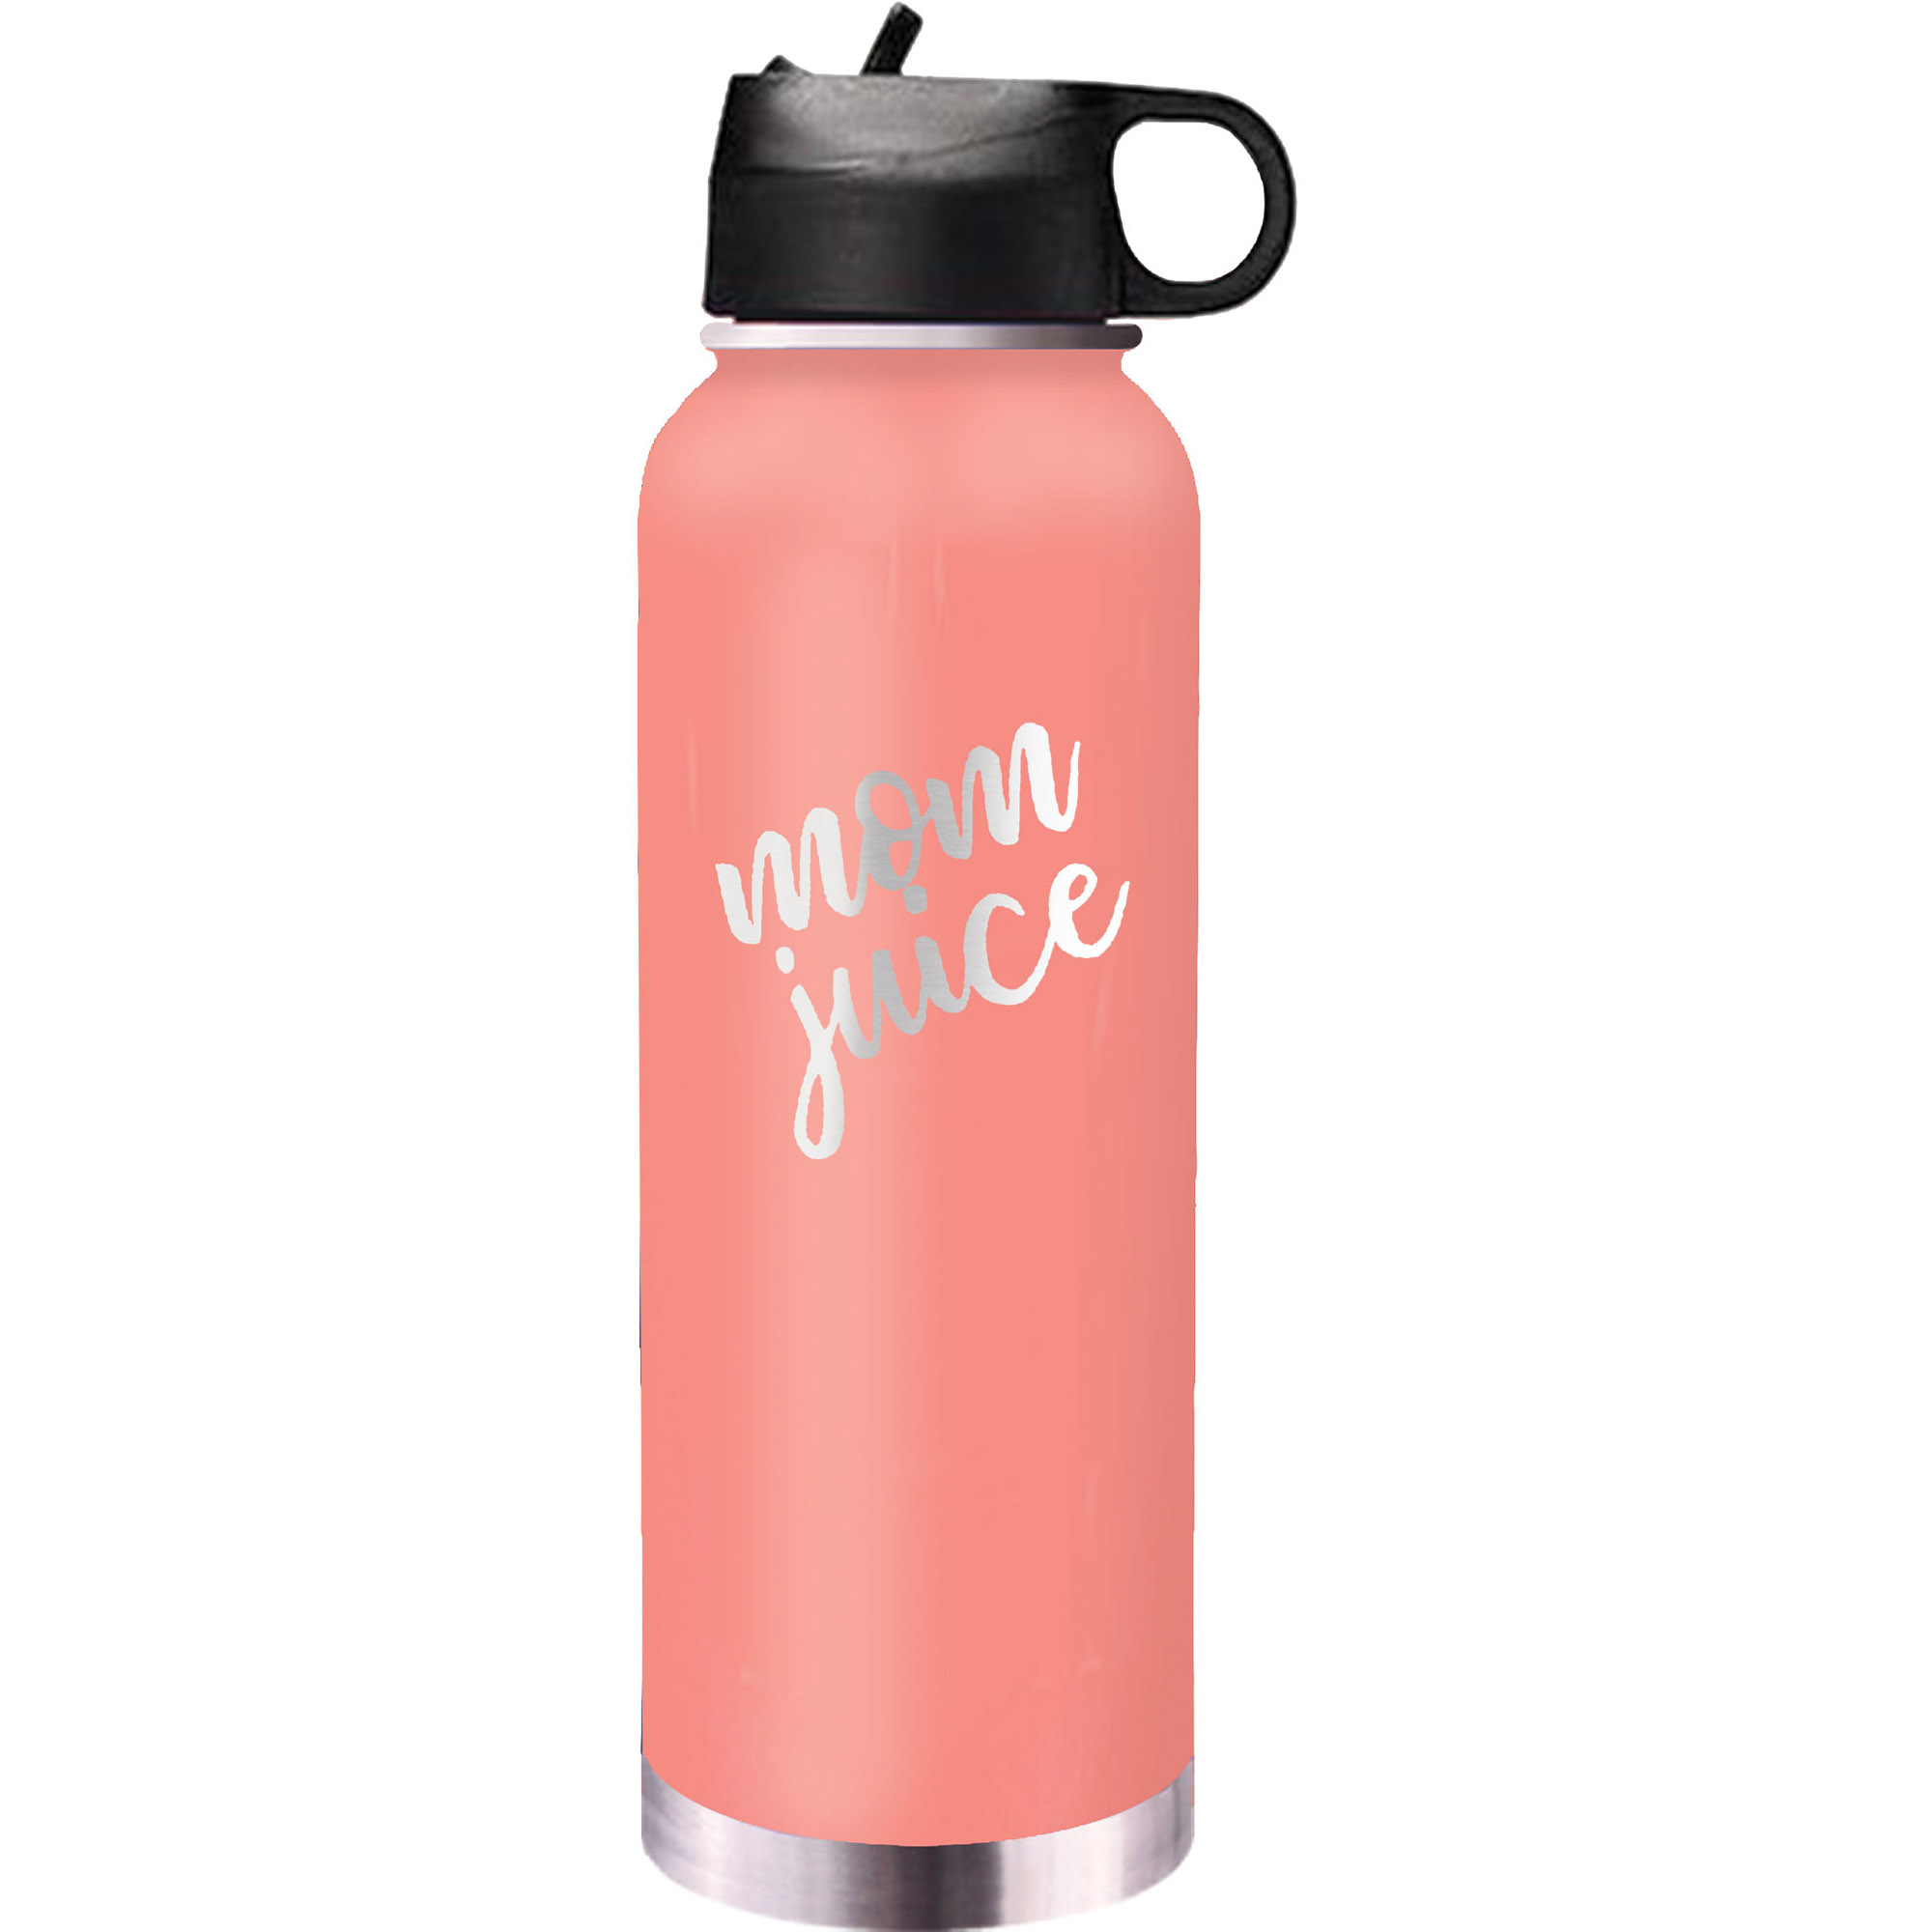 Tahoe© 32 oz. Insulated Water Bottle - Coral